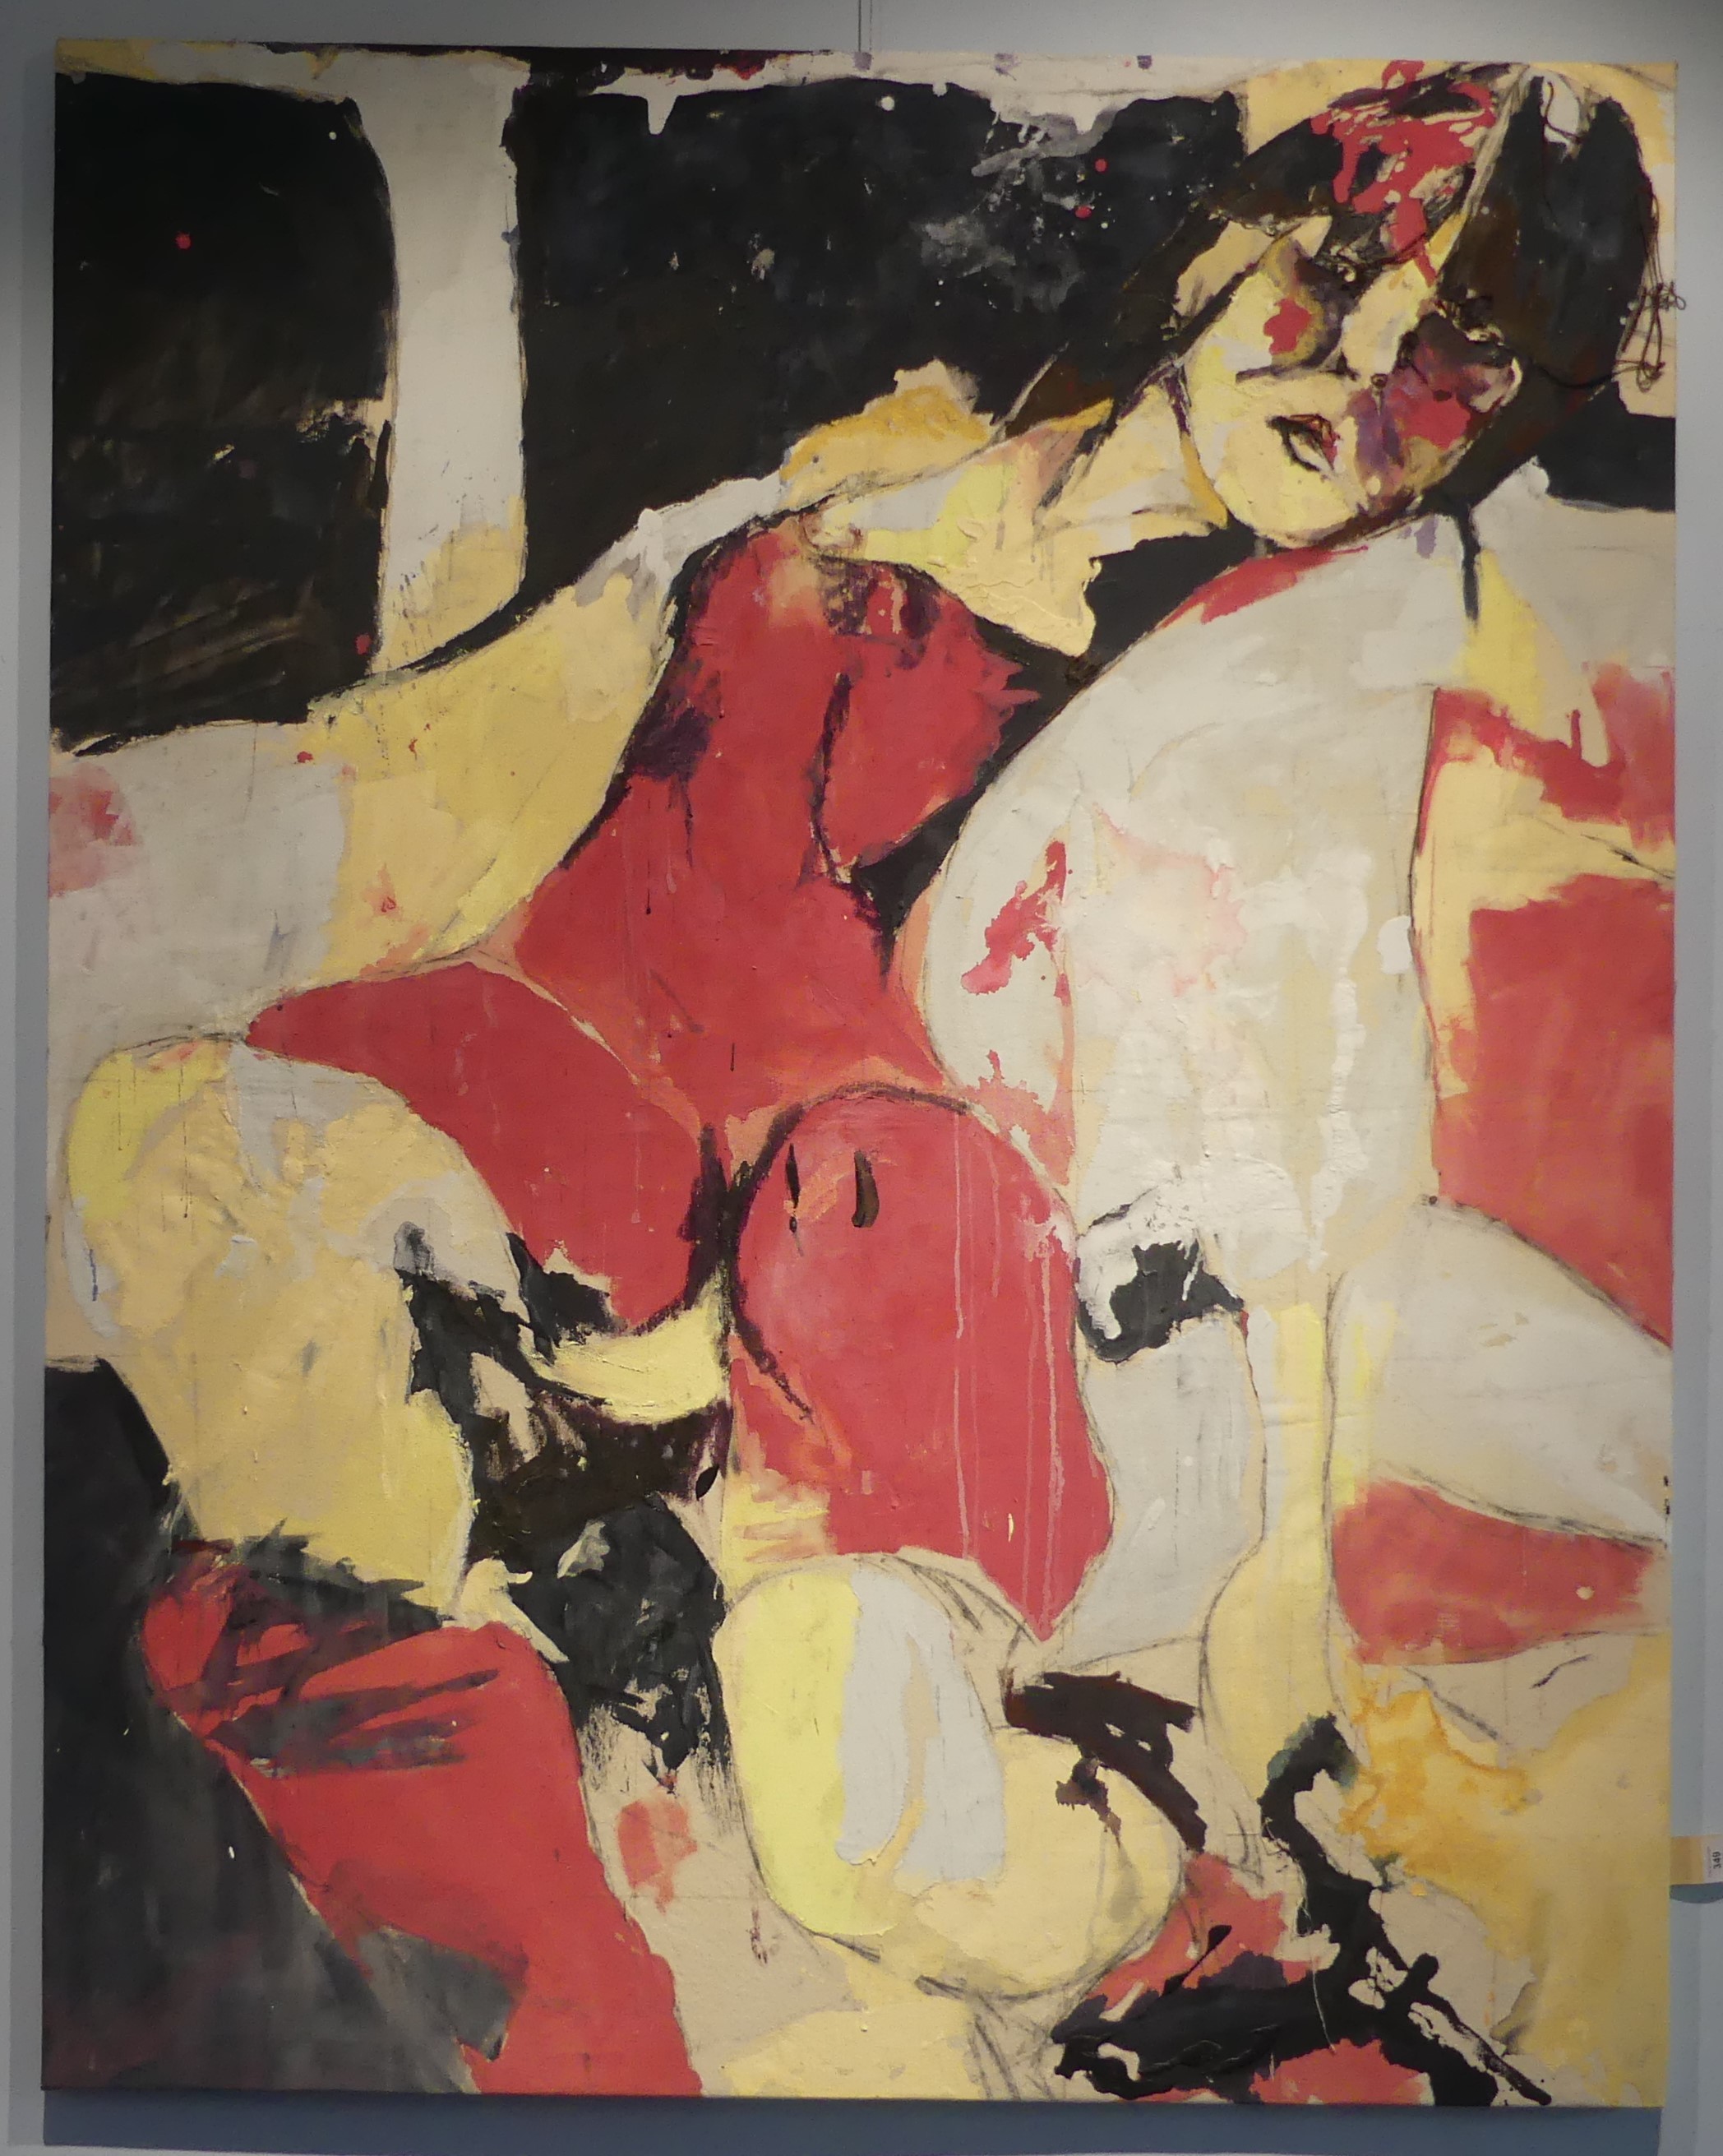 20th century School, 'Taxi', a large mixed media on canvas, 170cm x 135cm, unframed. Note: the